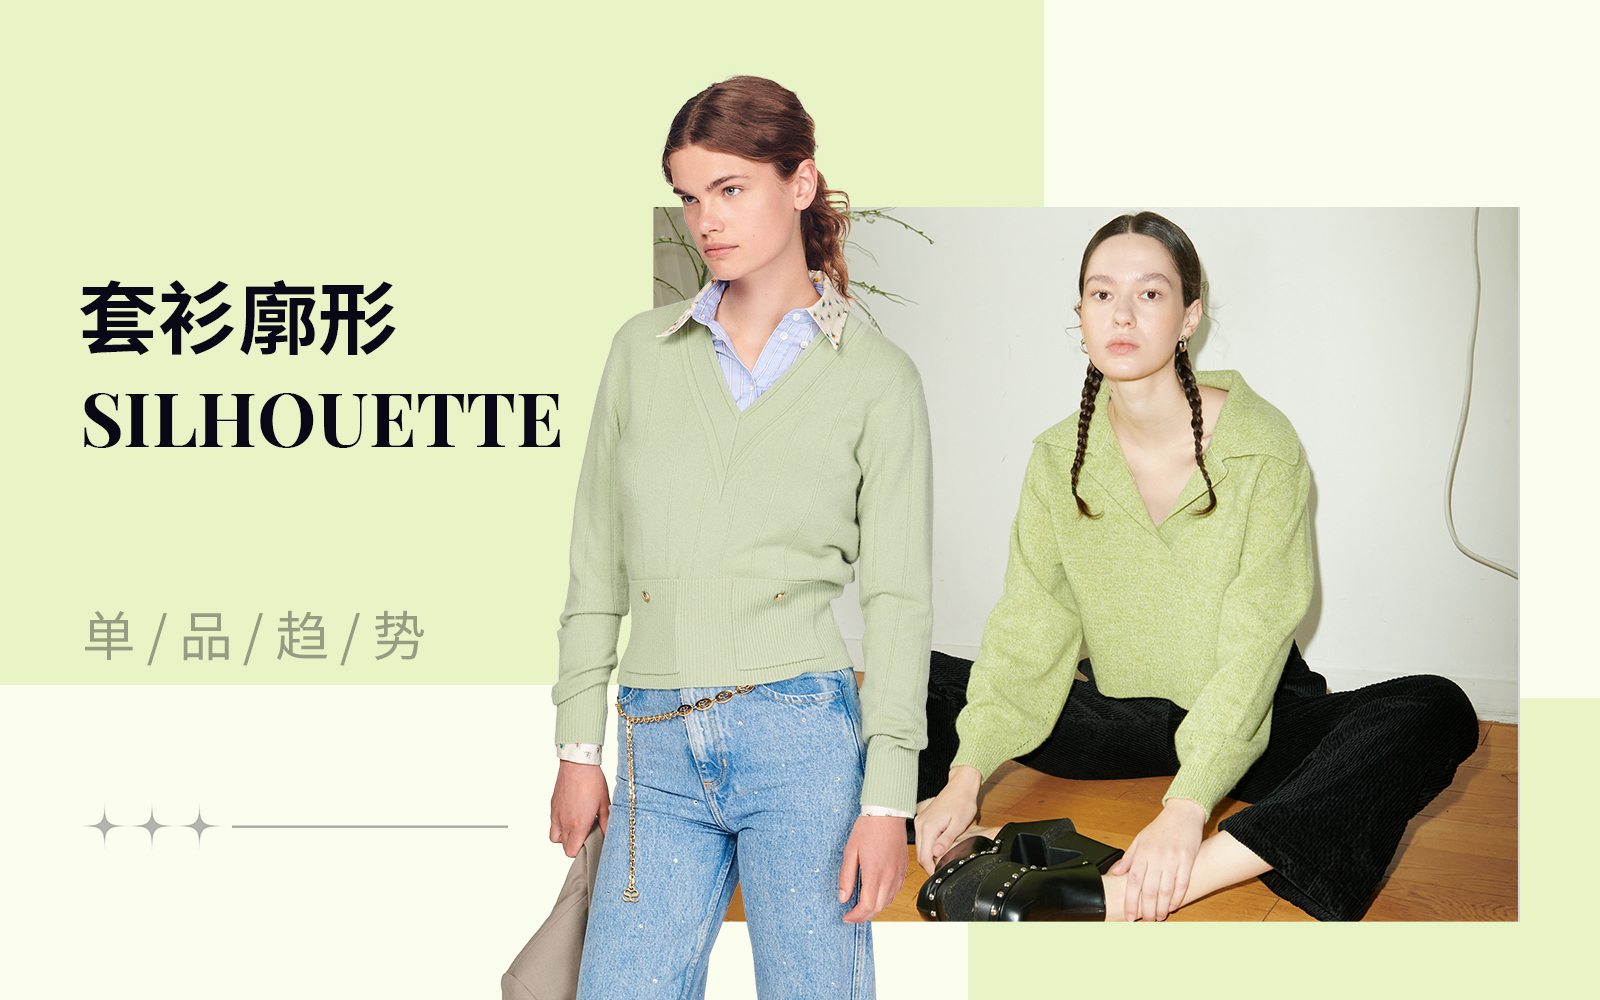 Pullover -- The Silhouette Trend for Women's Knitwear